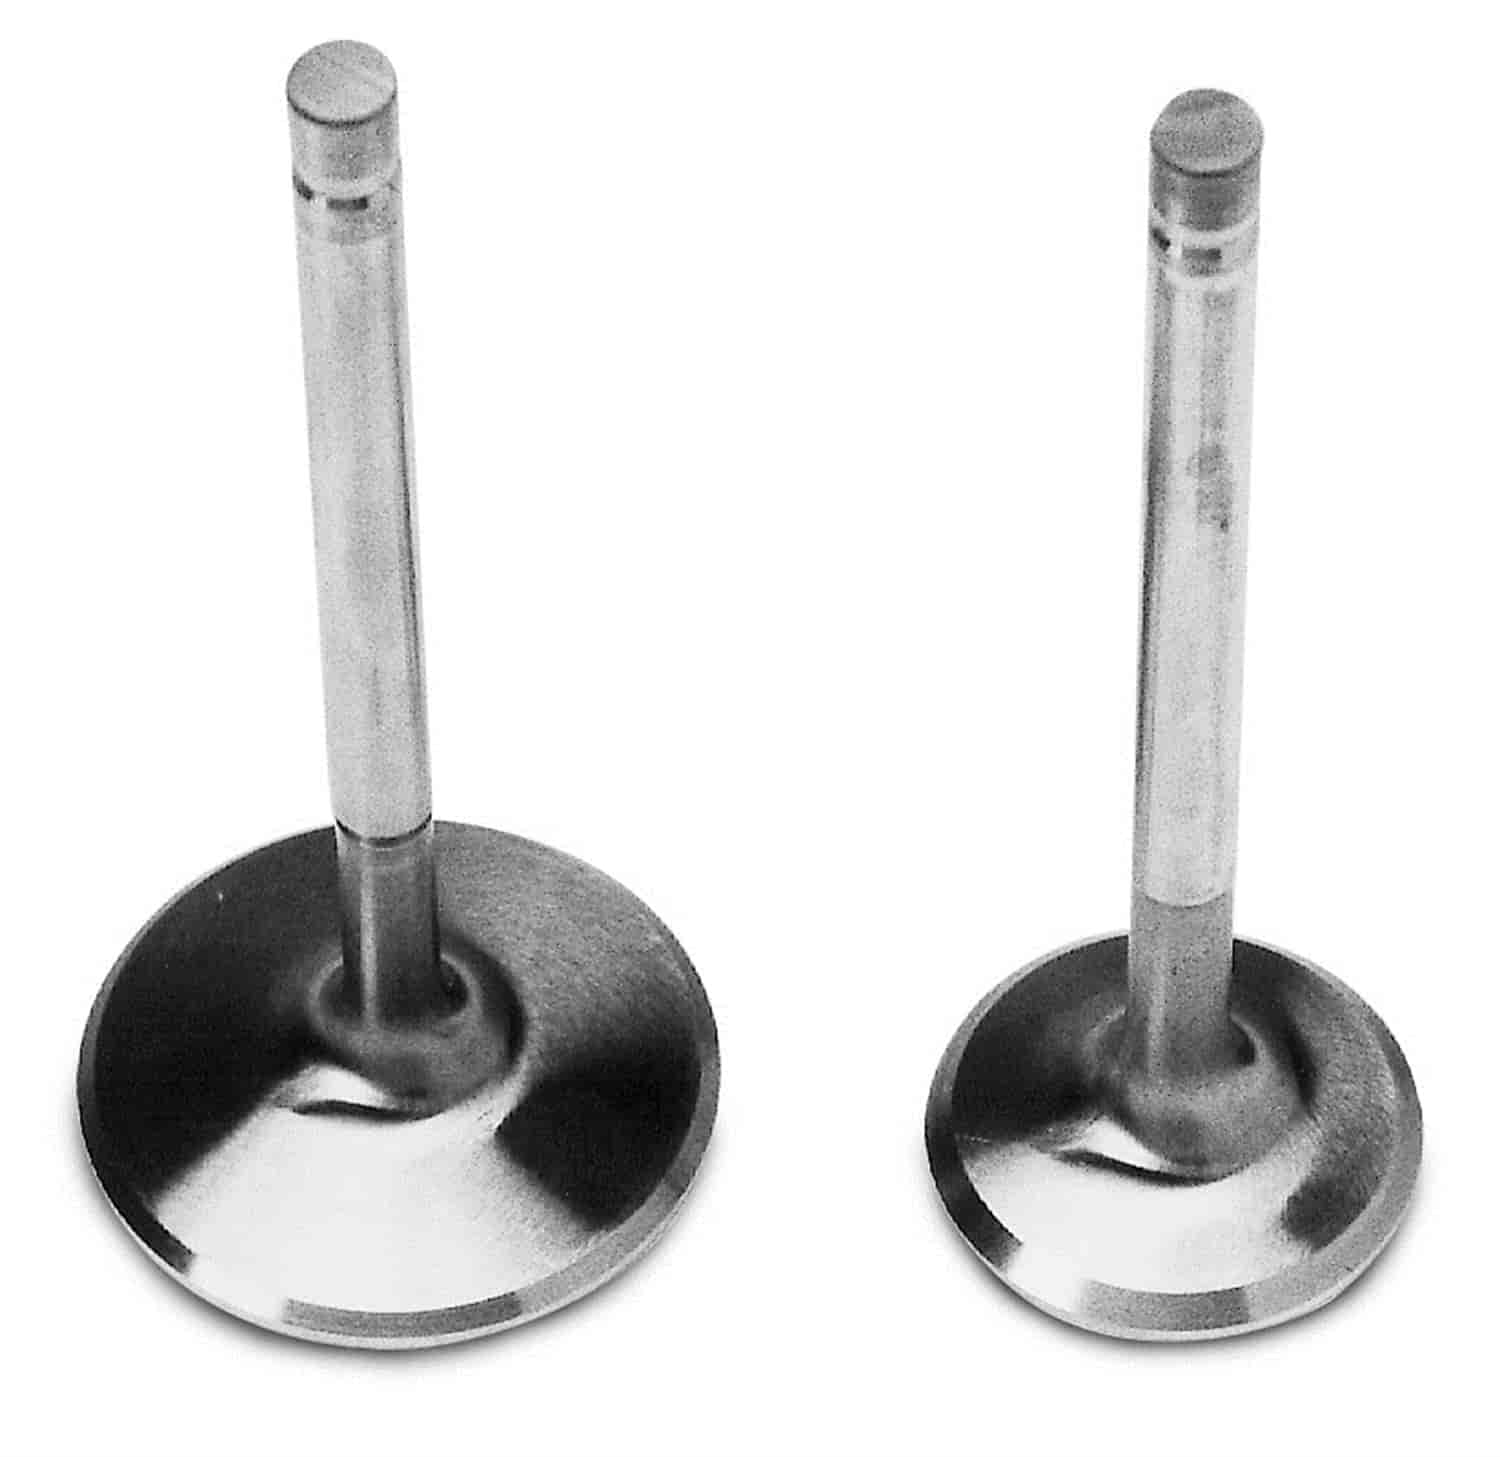 Intake Valve Set 2.05" for Small Block Ford Victor Jr. Heads #350-77169, 350-77179, 350-77189, 350-77199, & 350-77359